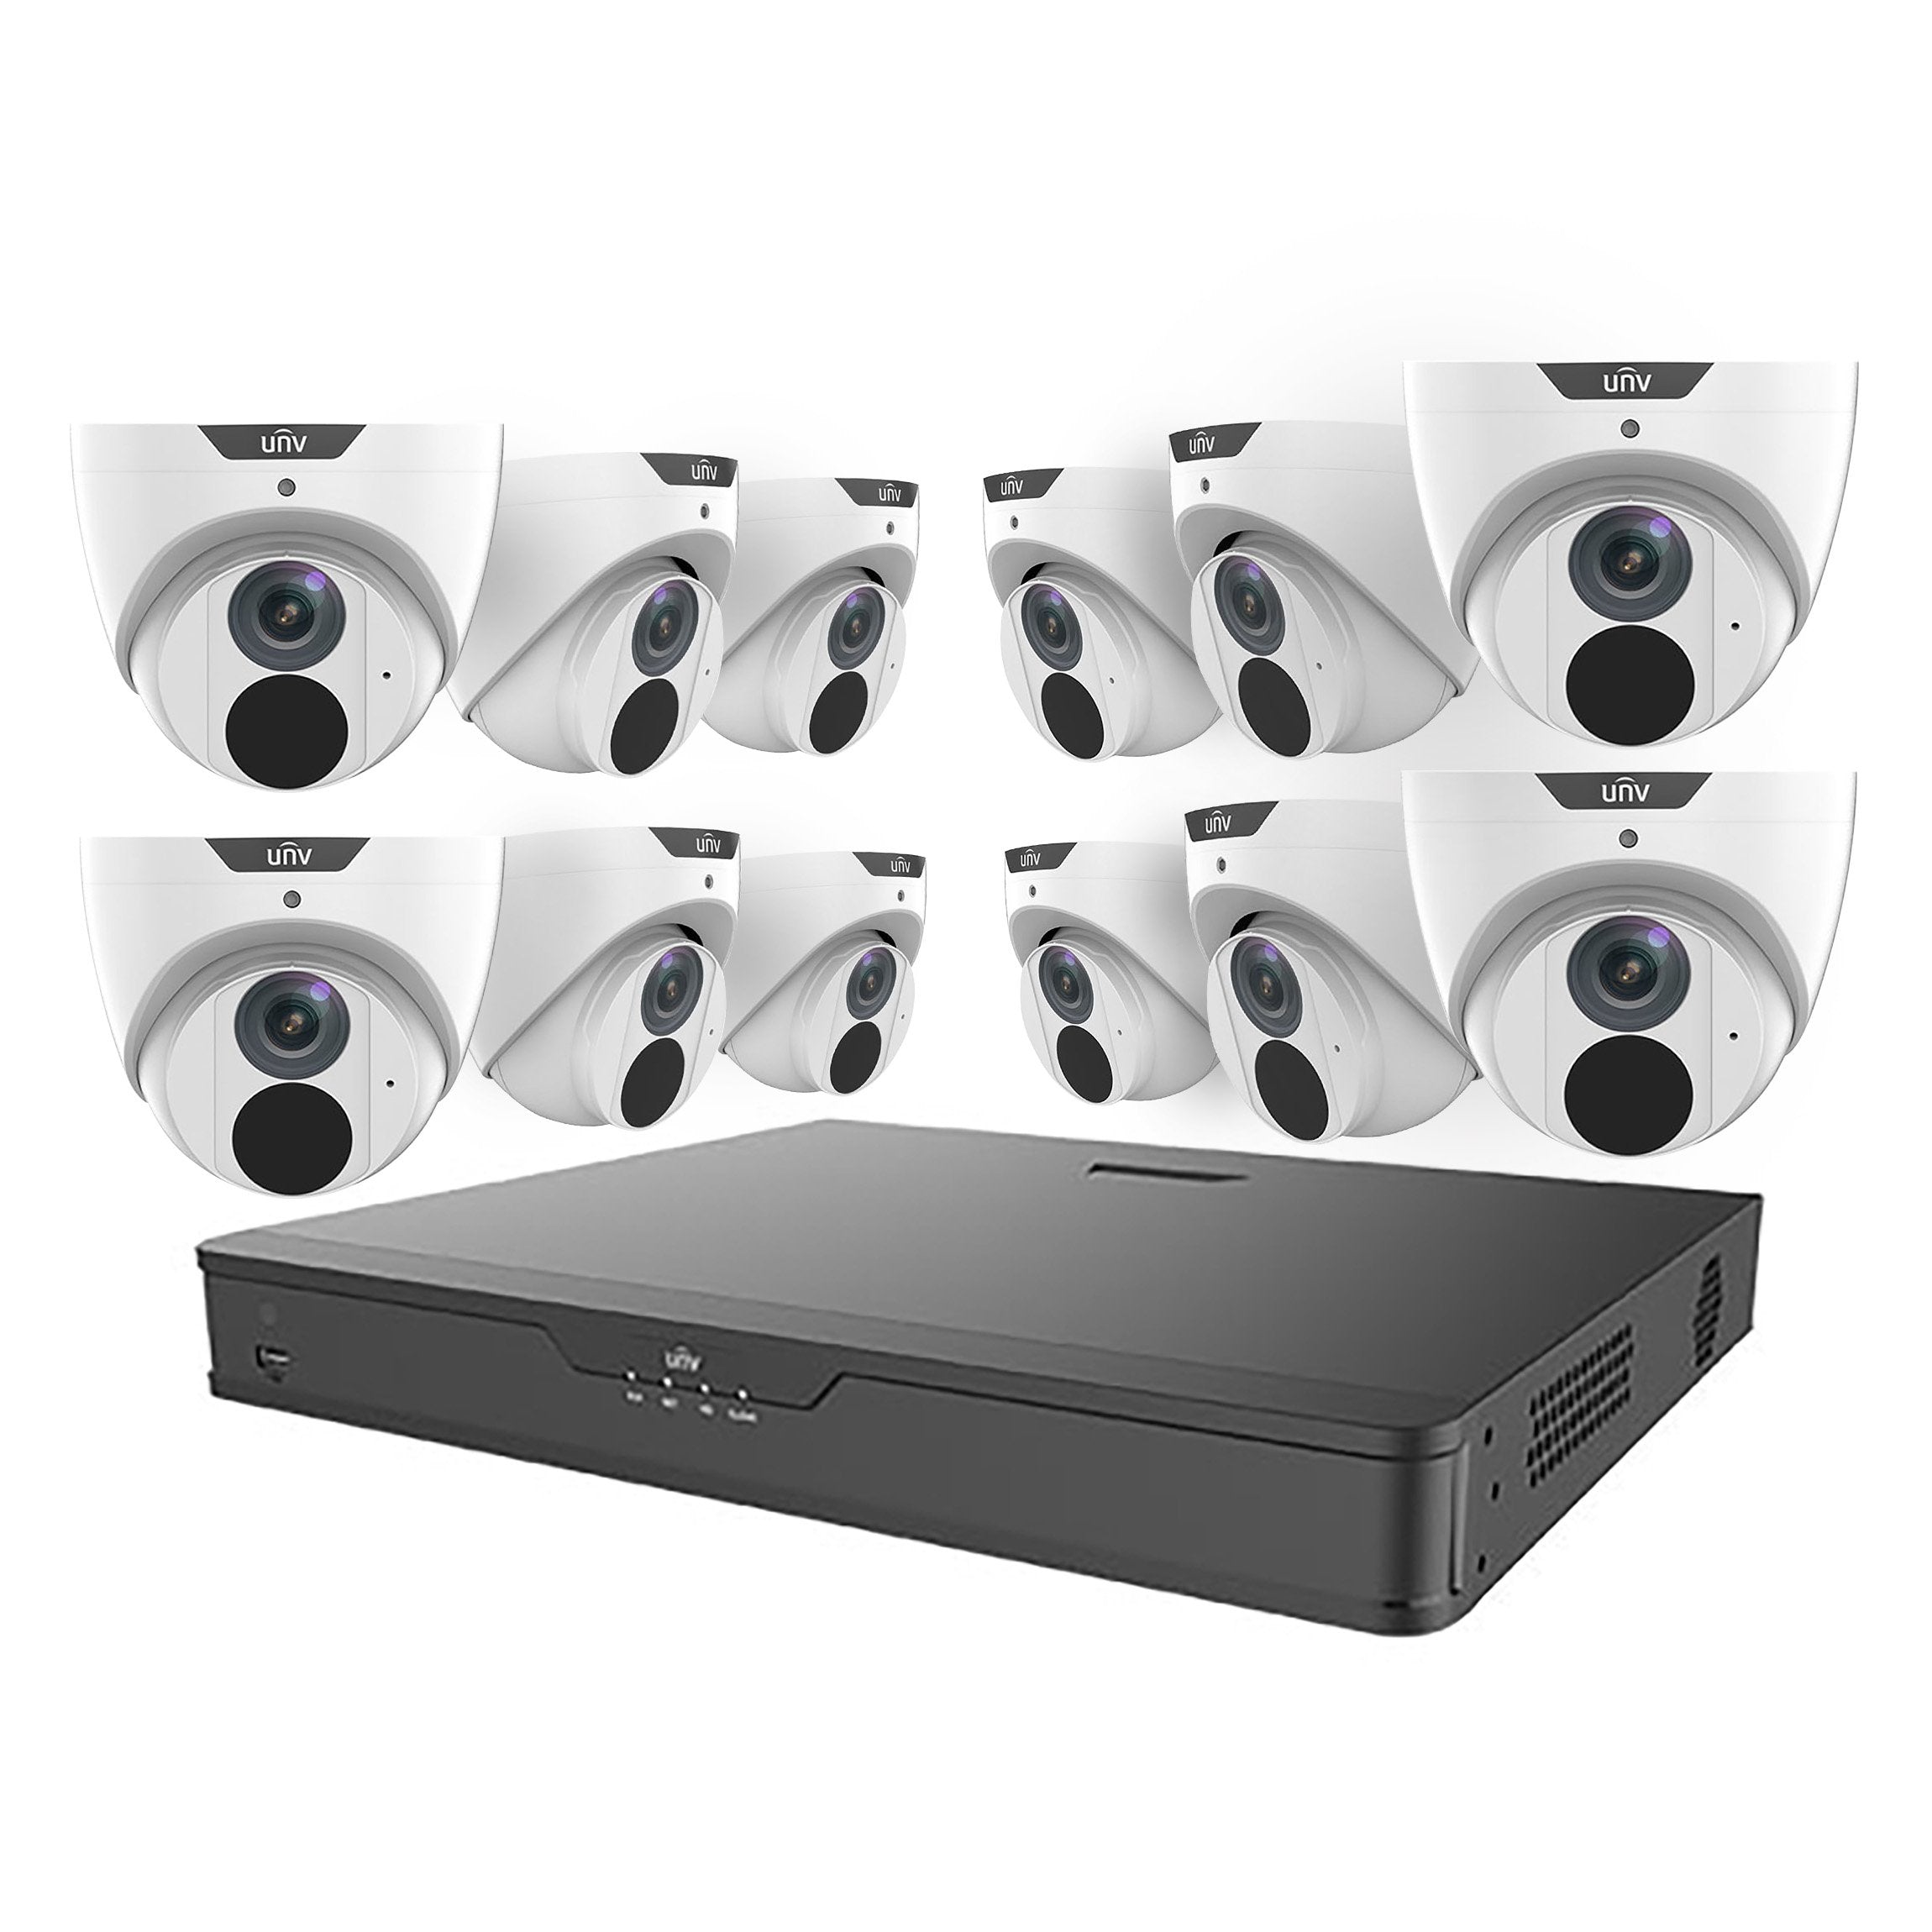 Uniview 16CH Easy Series 8MP Turret Kit - 1 x NVR302-16E2-P16-4TB, 12 x IPC3618LE-ADF28K-GM | Low Light, 2.8mm, 120dB WDR, 30m IR, Built-in Mic, IP67 (Wall Mount: TR-WM03-B-IN, Junction Box: TR-JB03-G-IN)